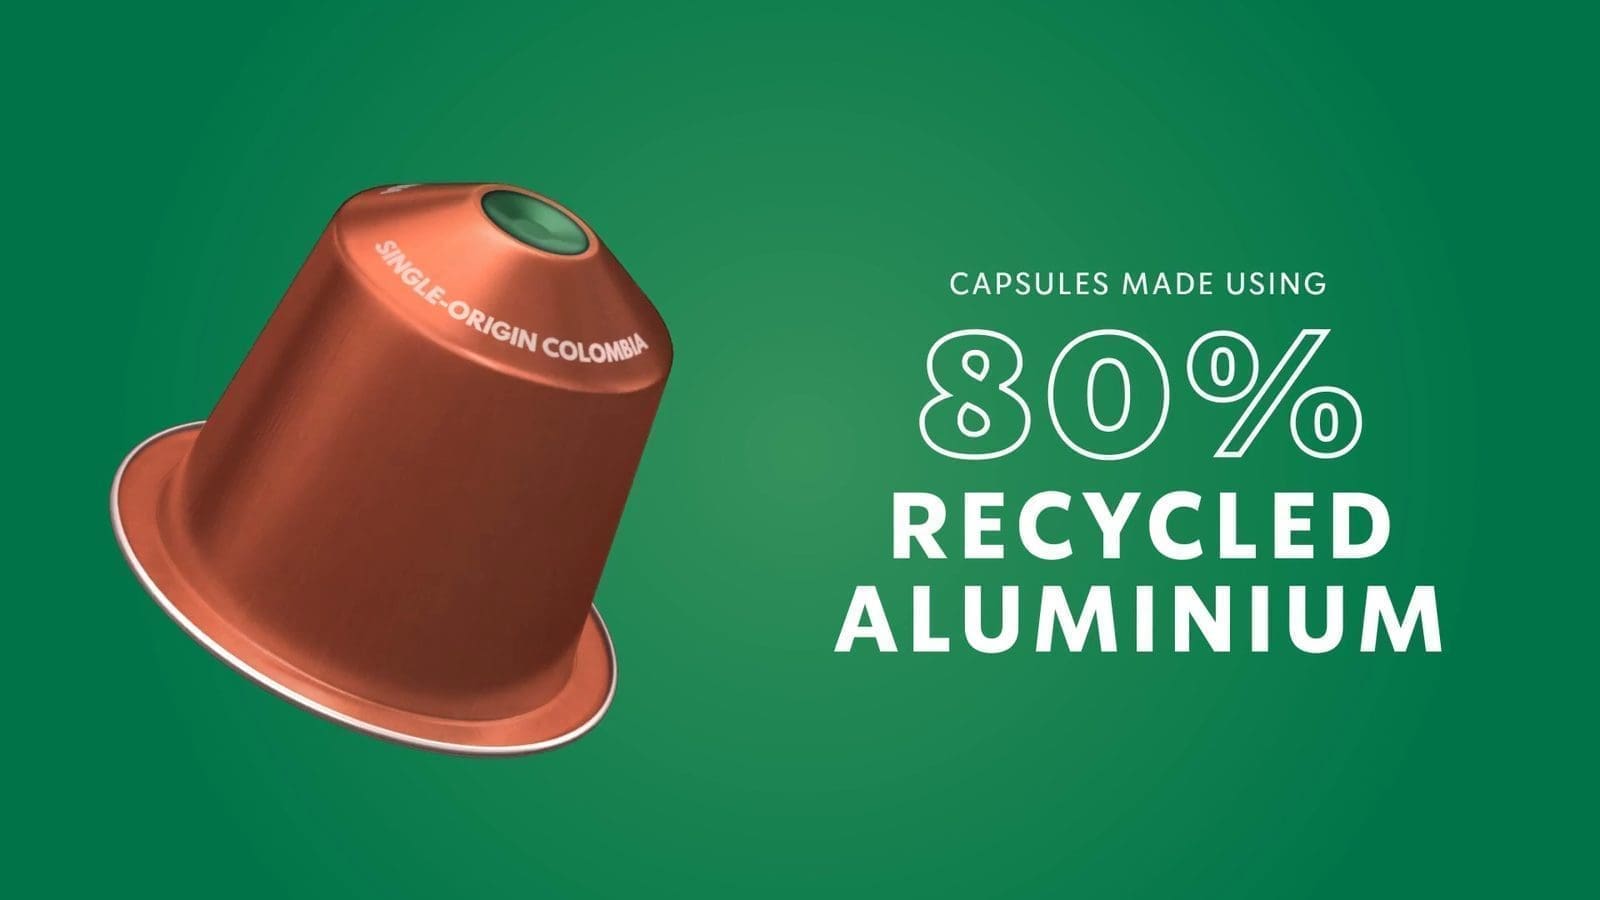 Nestlé introduces capsules made using 80% recycled aluminum to drive sustainability